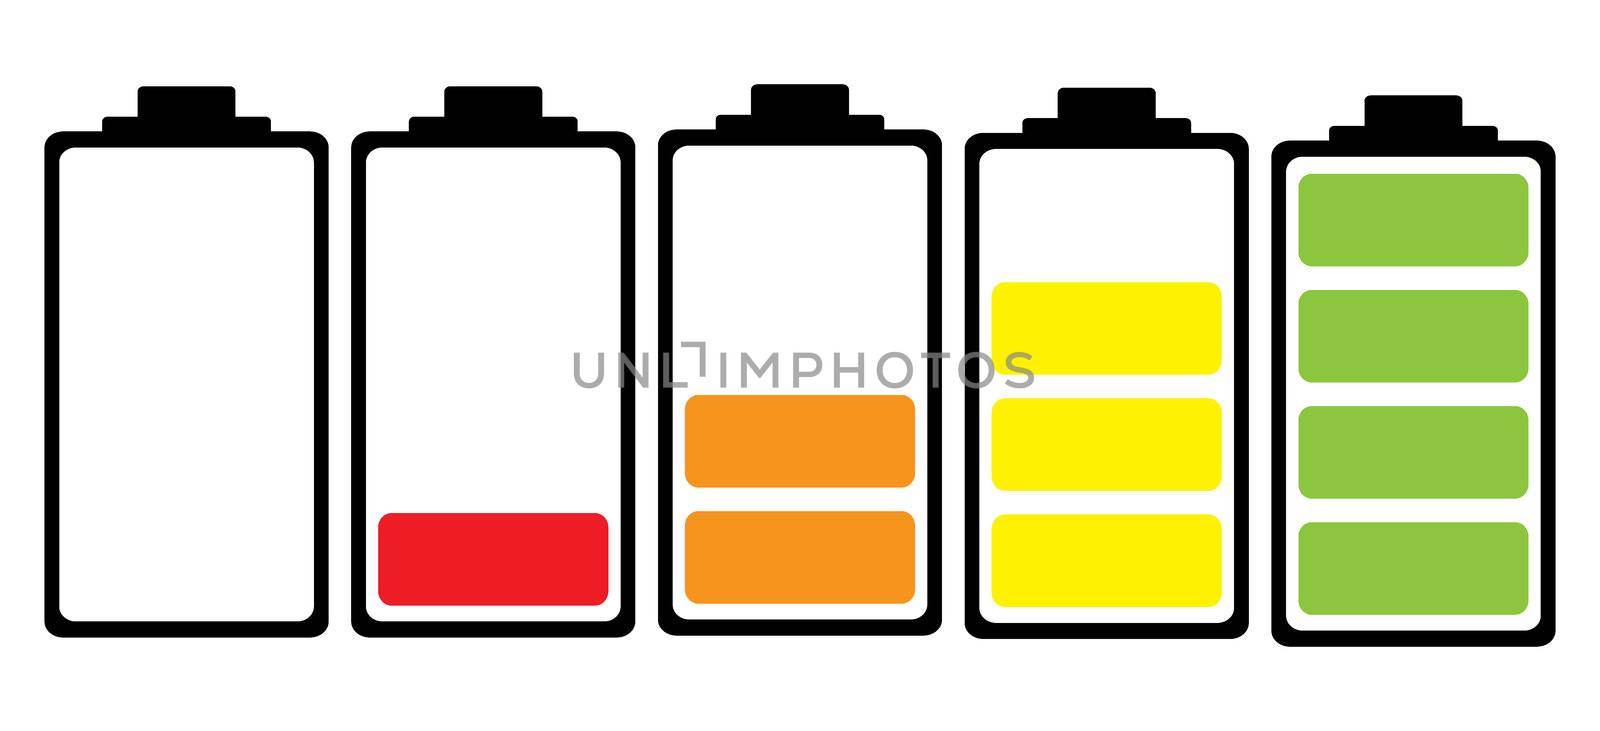 Simple illustrated battery icon with colourful charge level